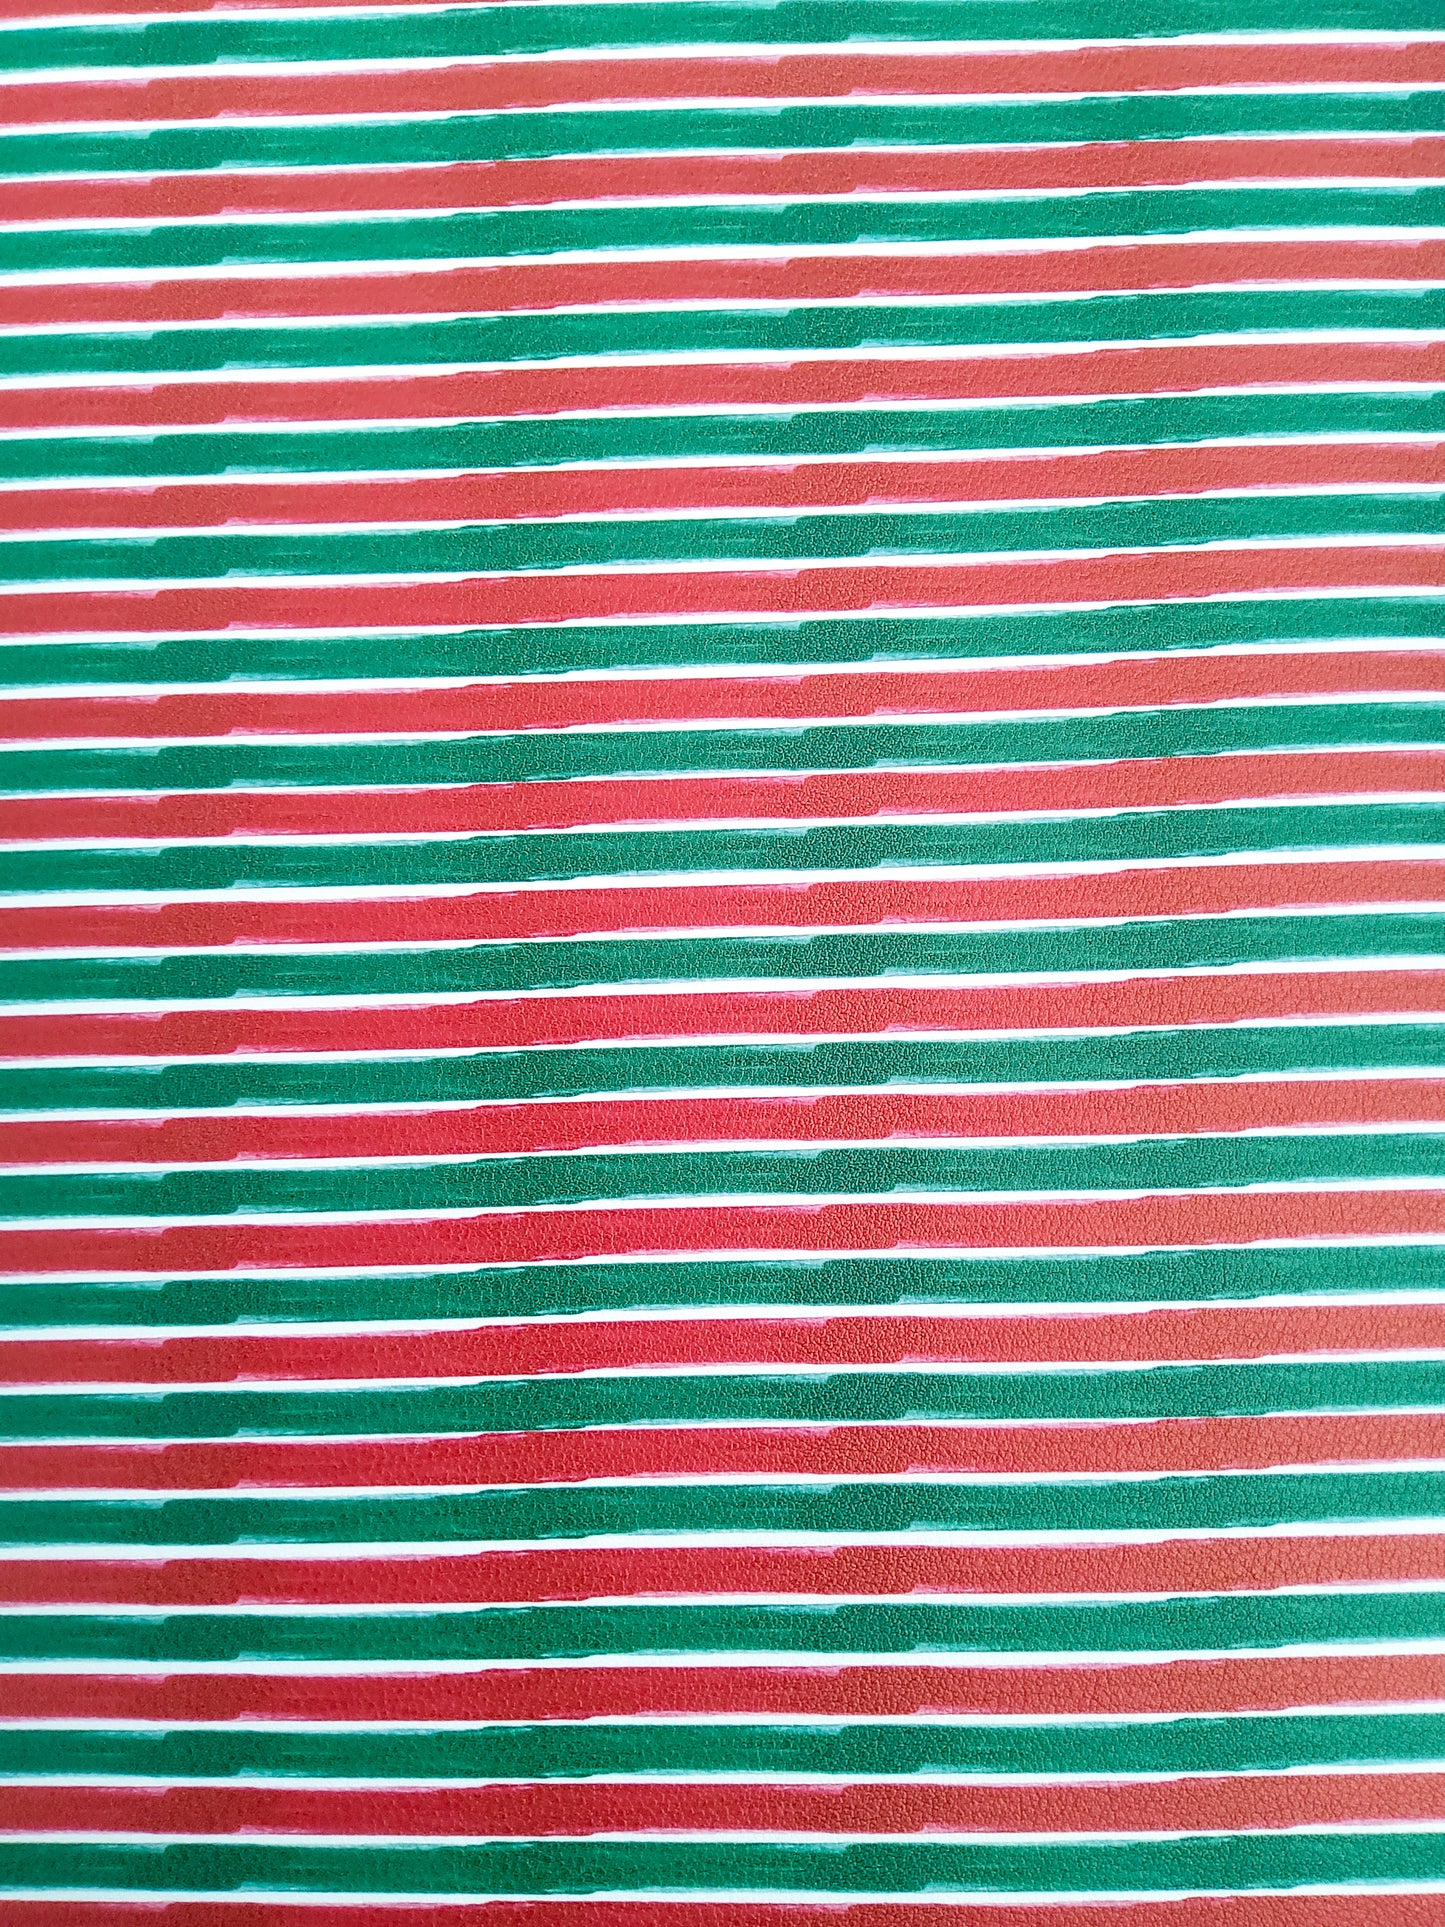 Distressed Red and Green Stripes 9x12 faux leather sheet